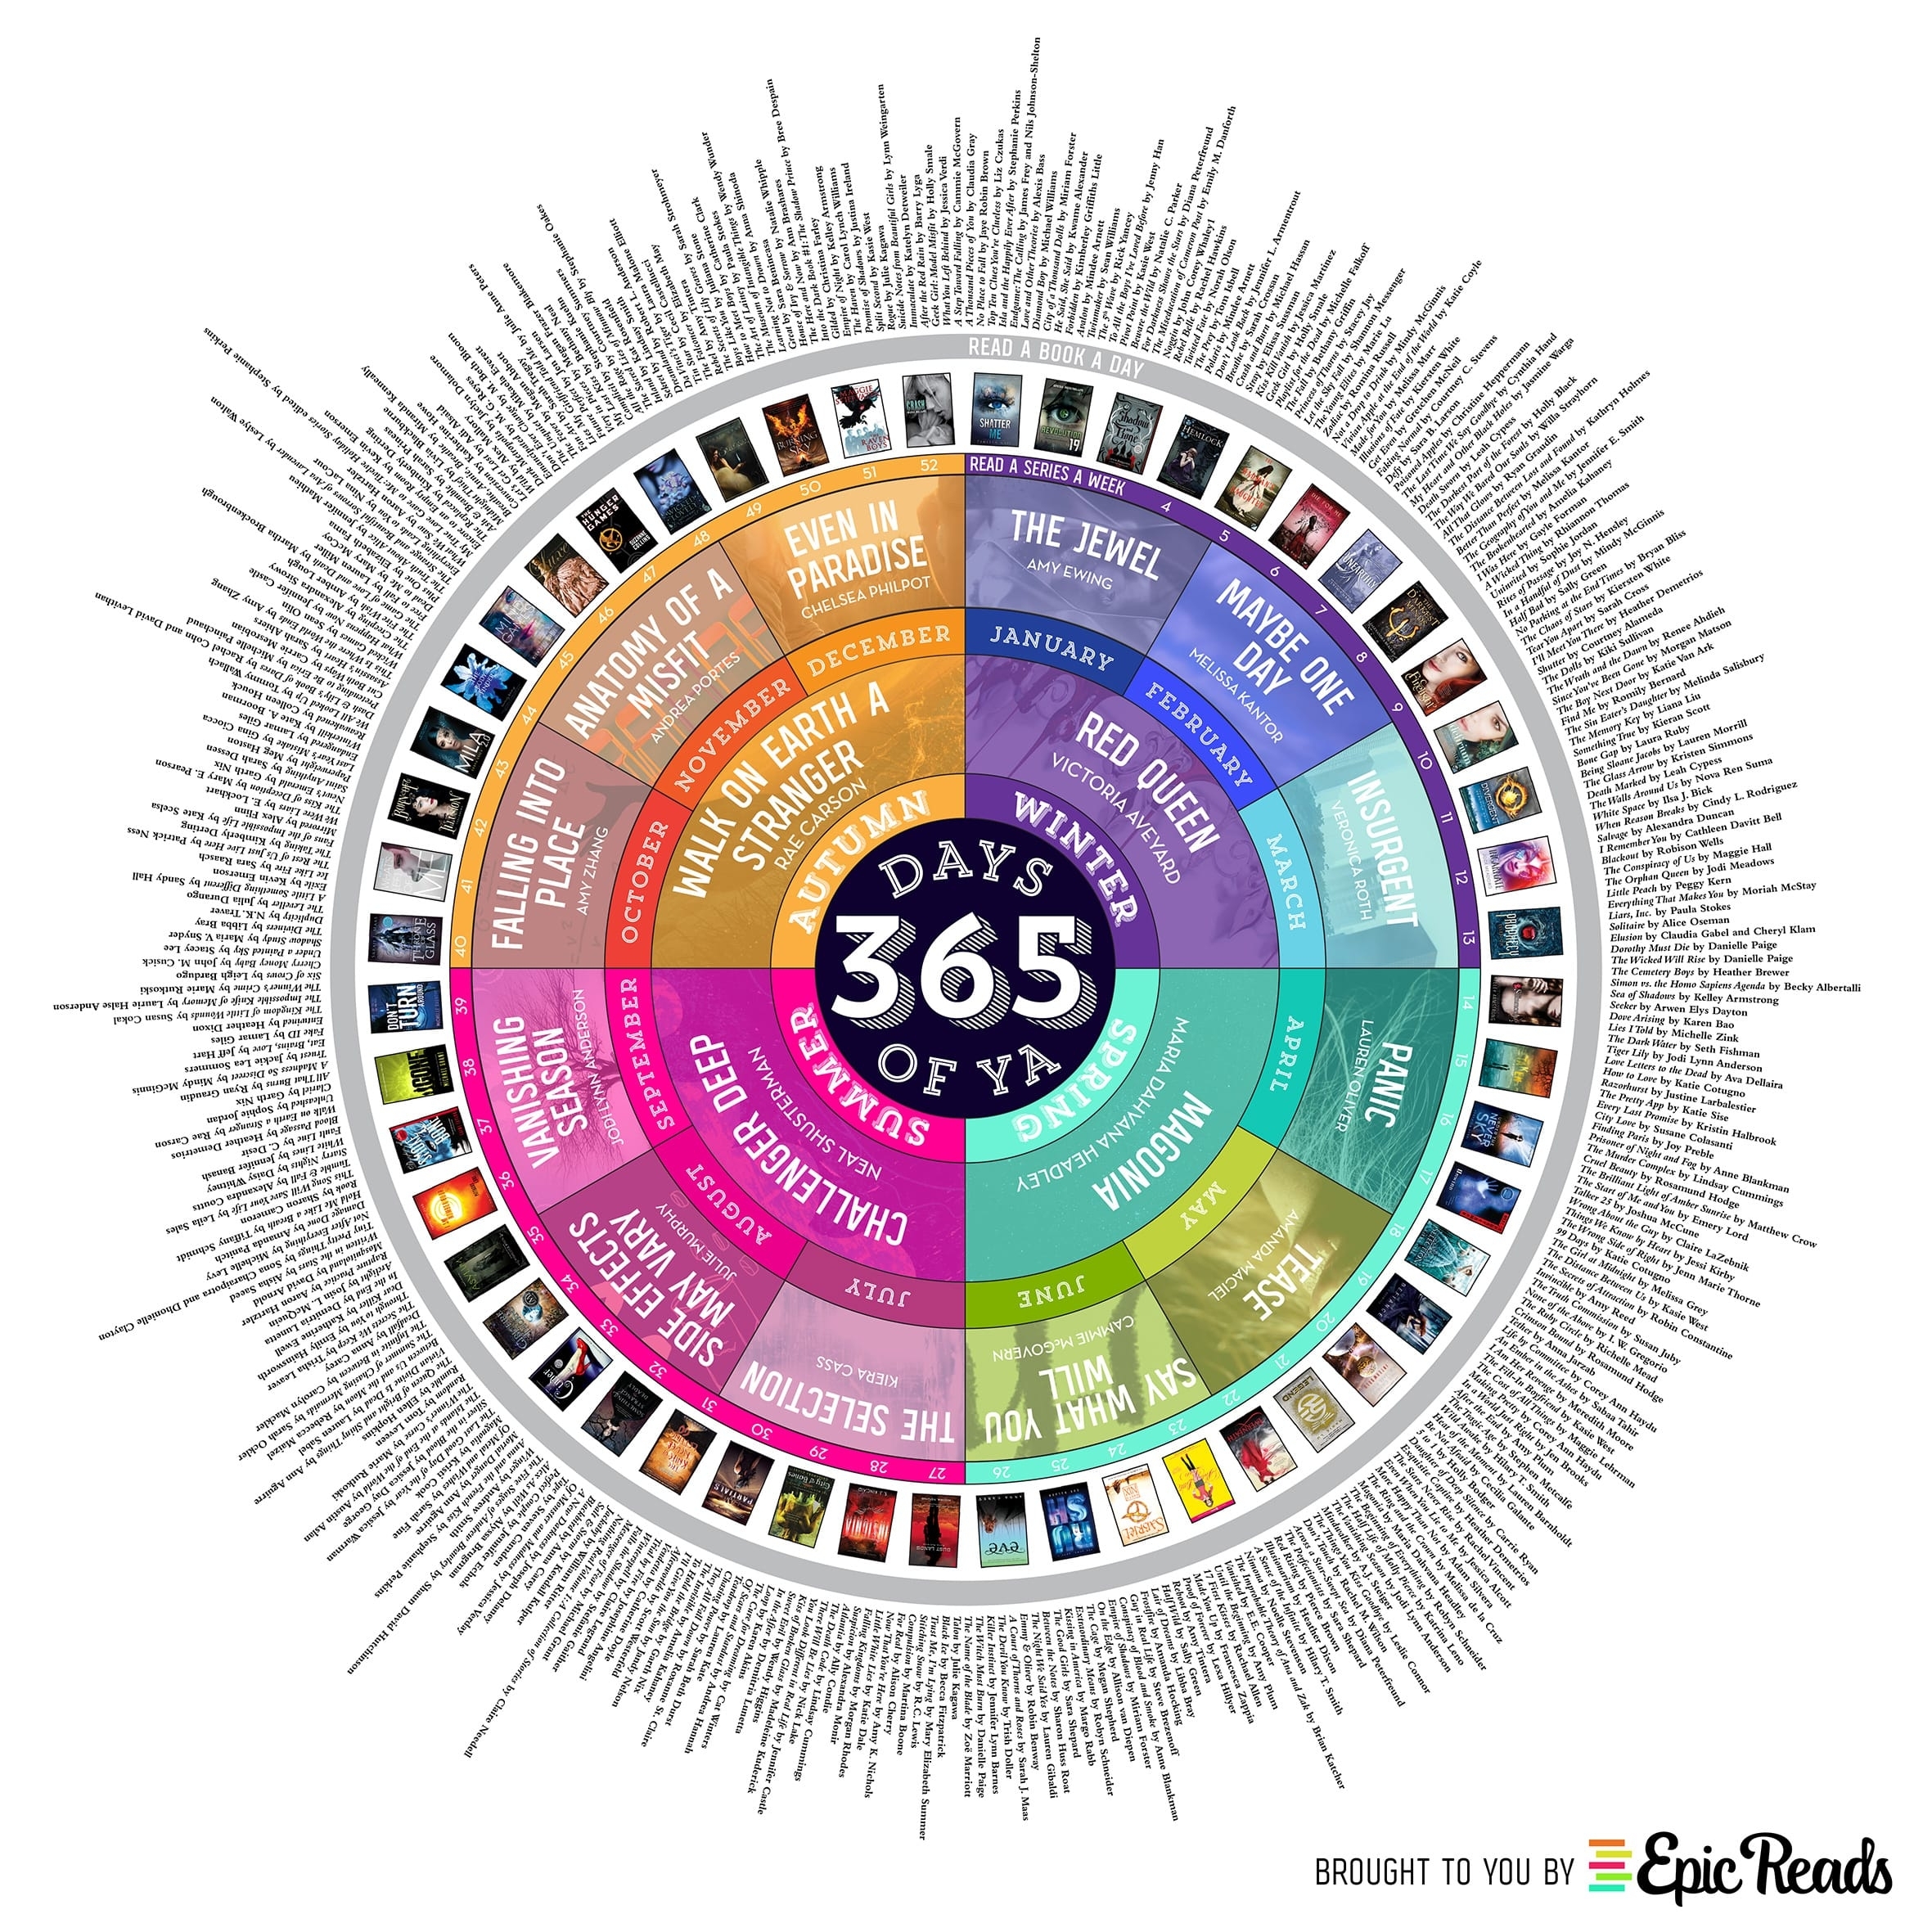 365 Days Of Ya: A 2015 Reading Calendar! [Infographic